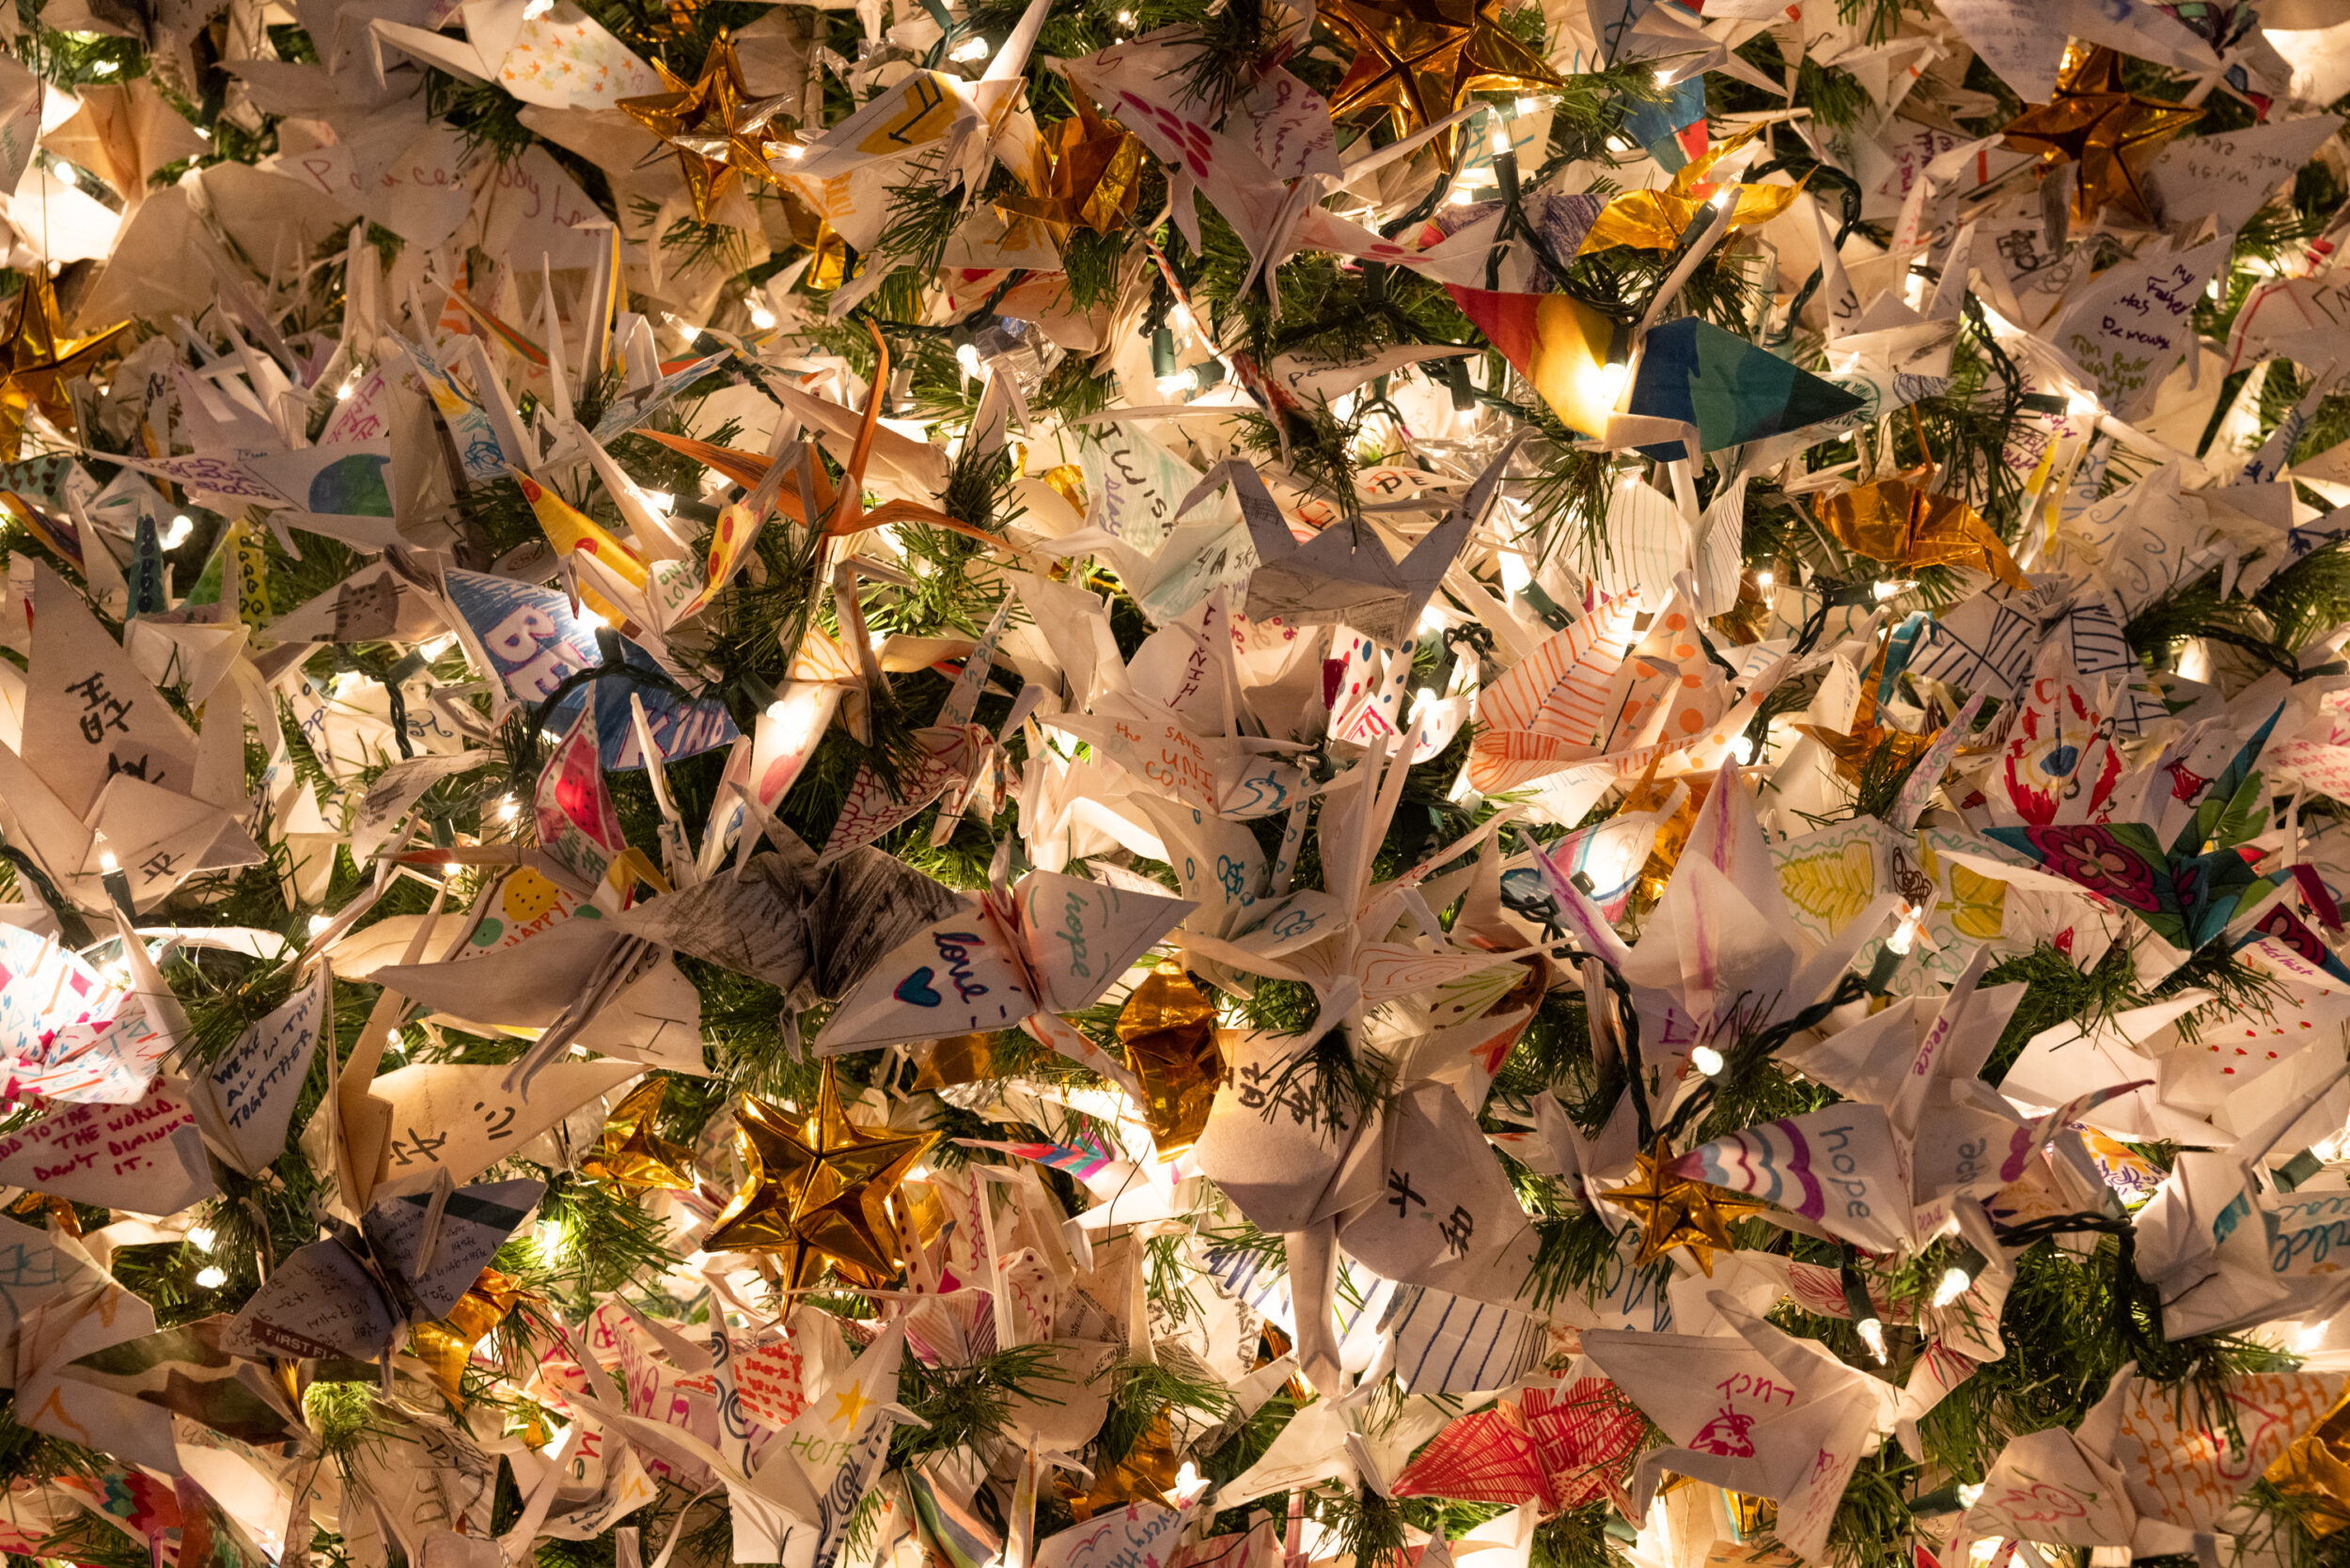 A close-up photo shows a portion of the 10,000 illuminated origami paper cranes make up Grace Cathedral's "World Tree of Hope."